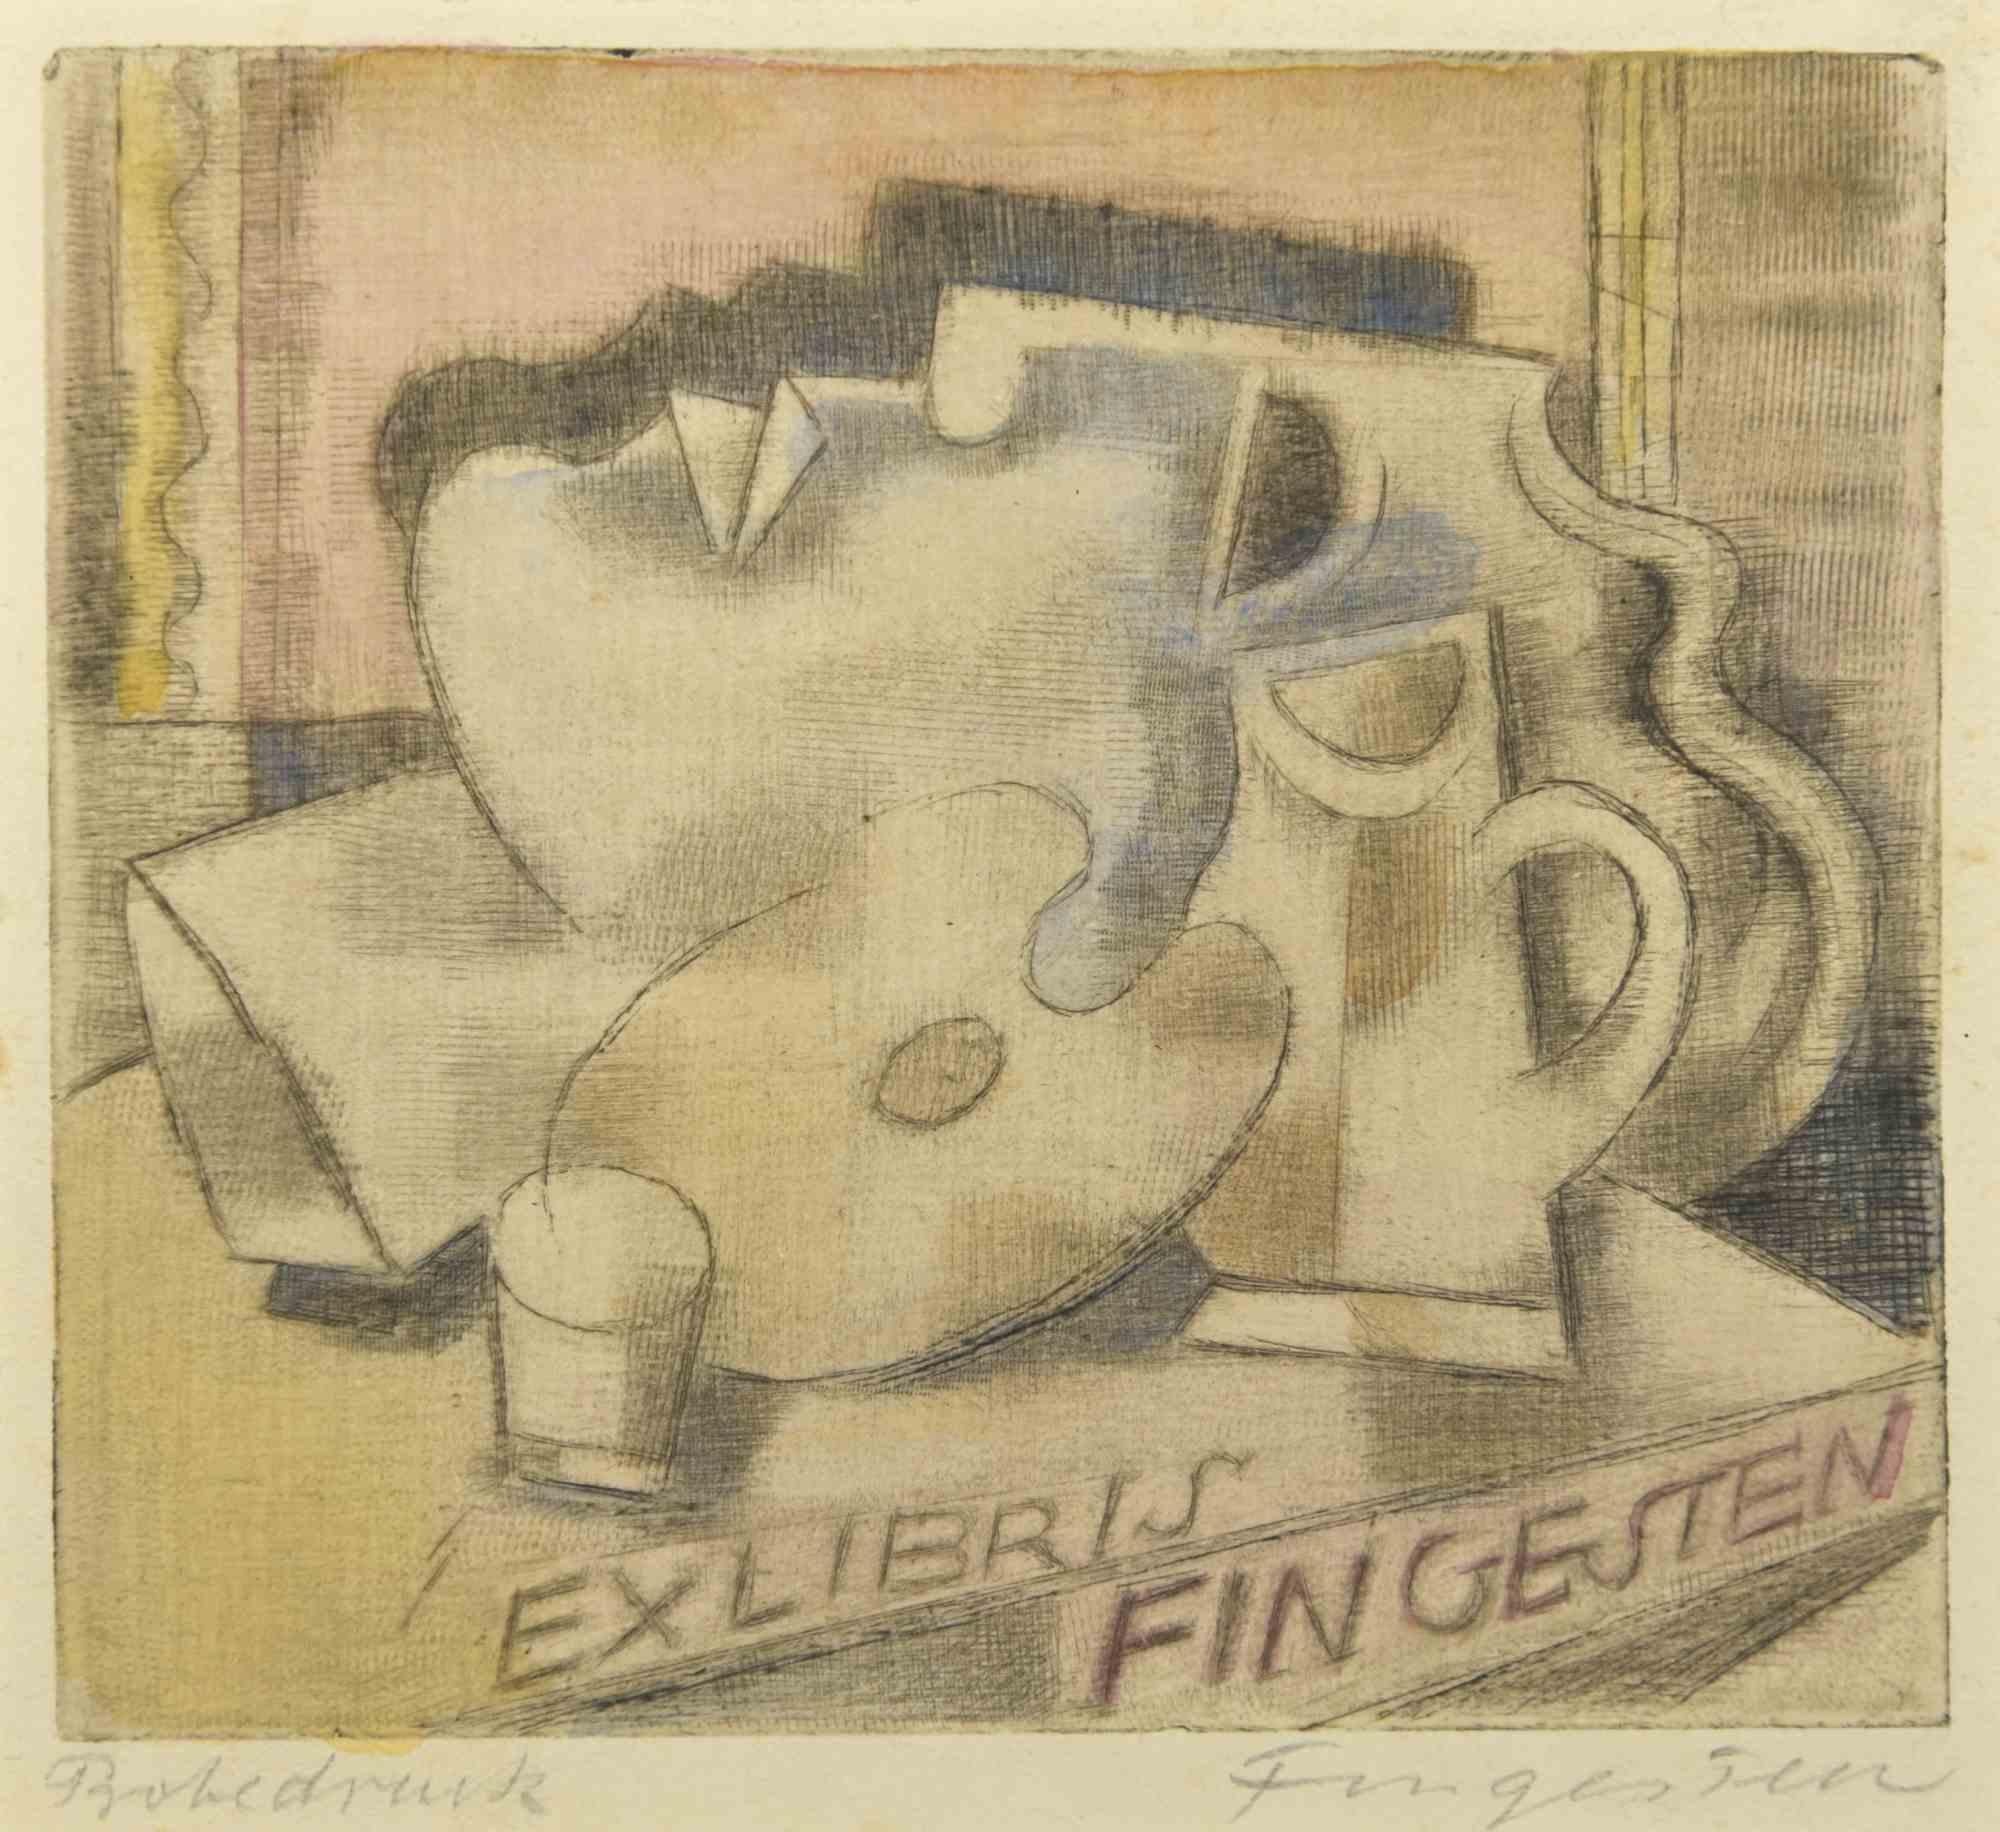 Ex Libris - Fingesten is a colored Etching print created by  Michel Fingesten.

Hand Signed on the lower right margin.

Very Good condition.

Michel Fingesten (1884 - 1943) was a Czech painter and engraver of Jewish origin. He is considered one of